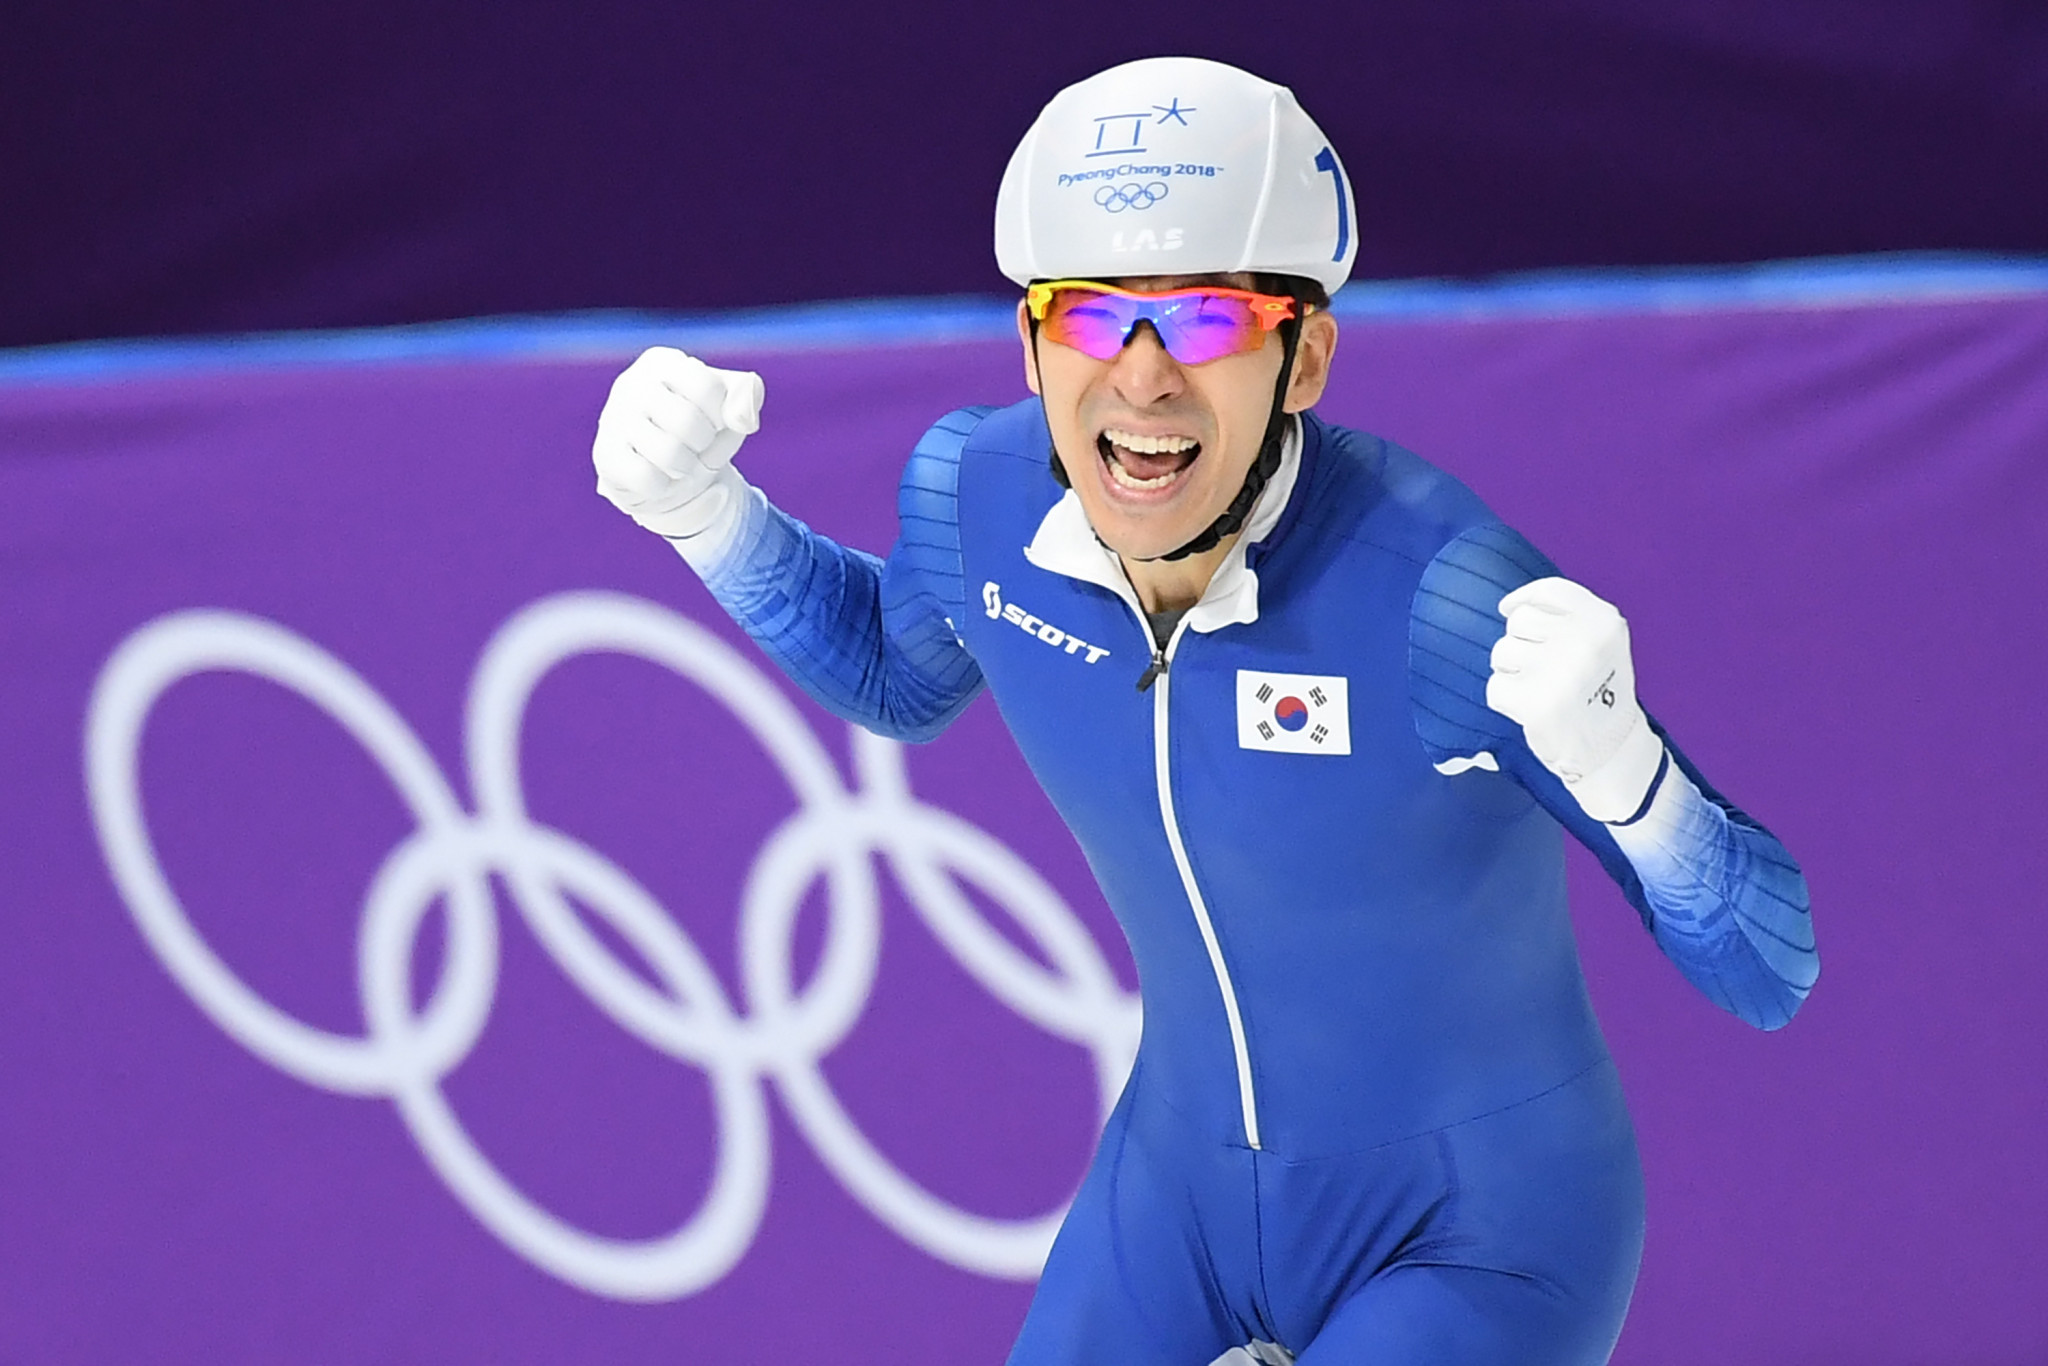 Lee Sung-hoon is aiming to compete at Milan Cortina 2026 ©Getty Images